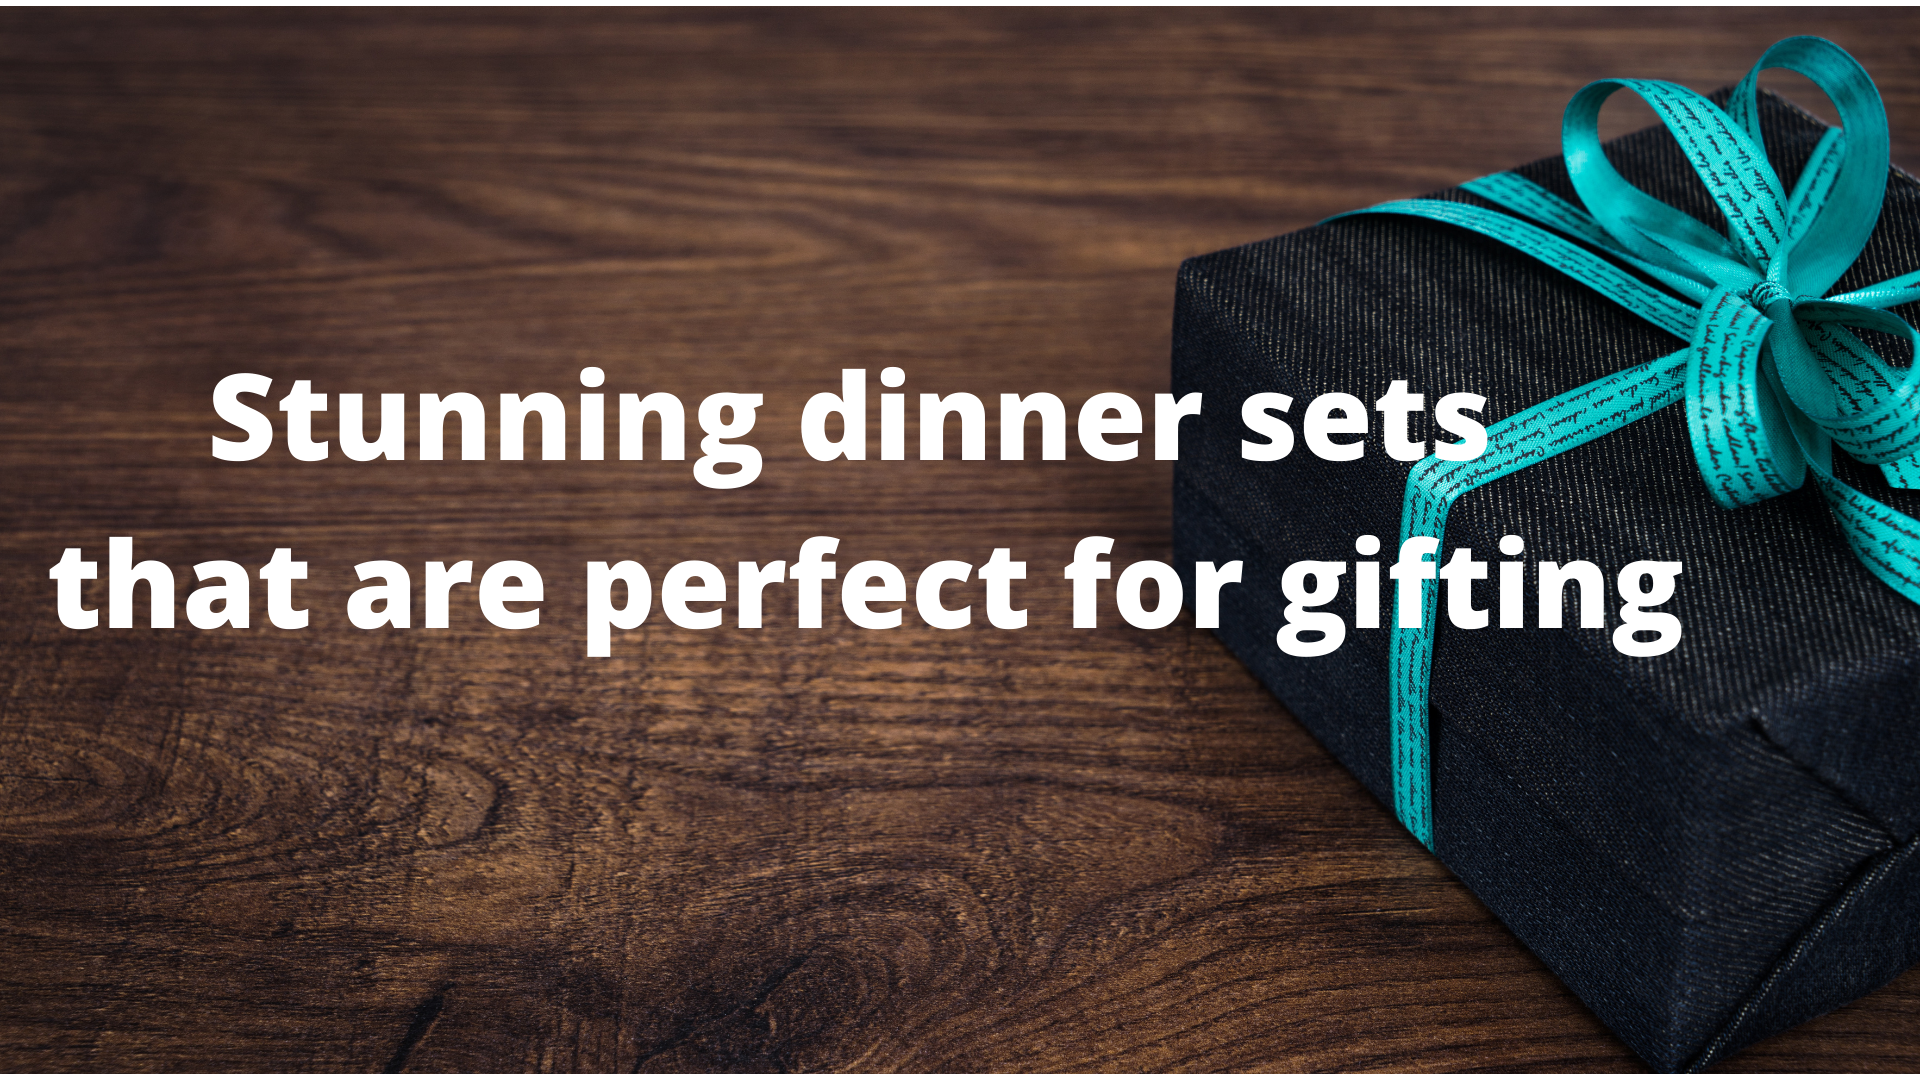 Stunning dinner sets that are perfect for gifting